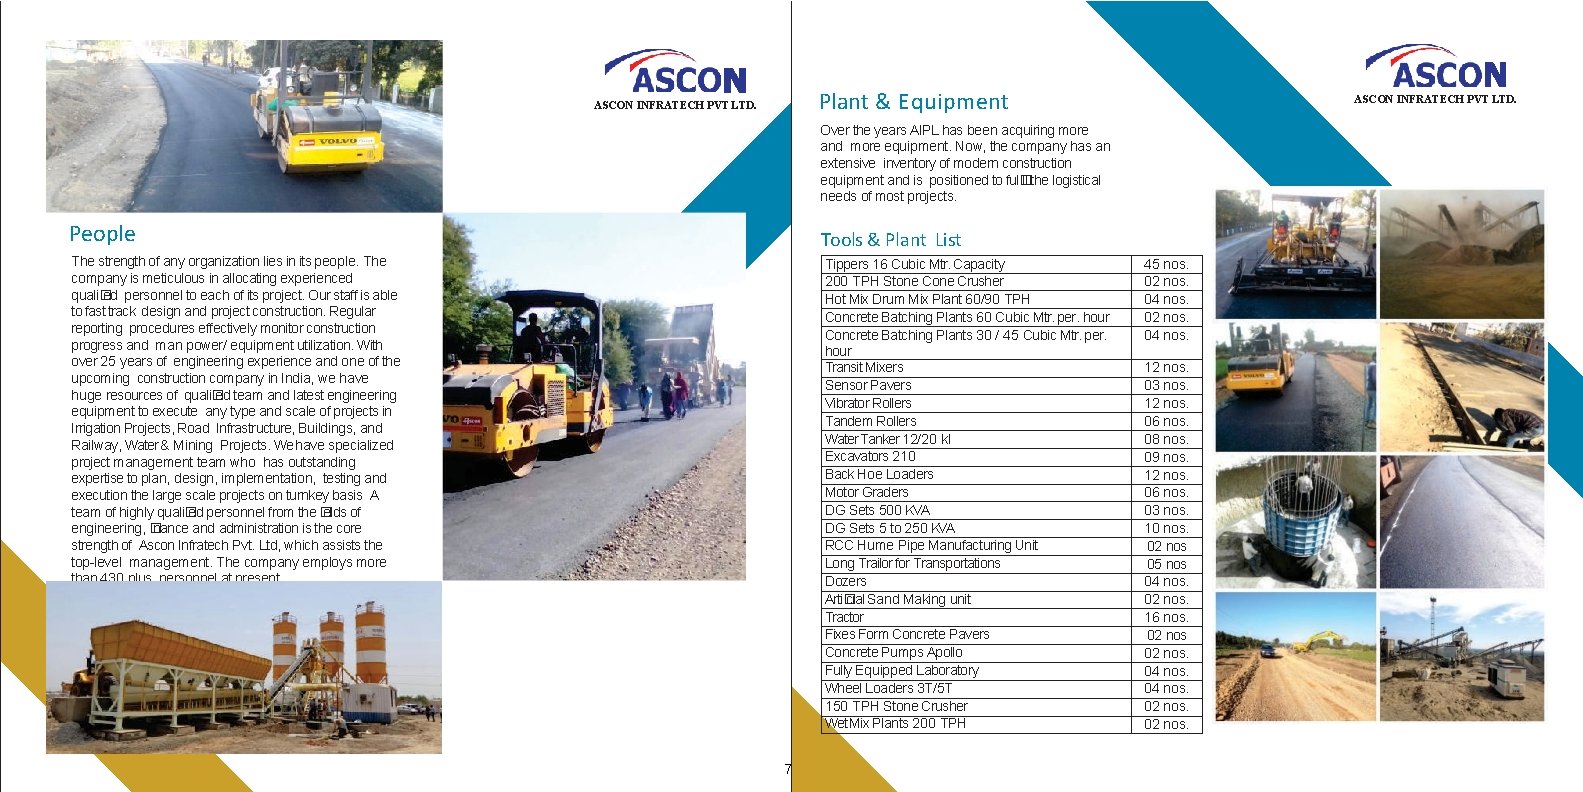 Plant & Equipment ASCON INFRATECH PVT LTD. Over the years AIPL has been acquiring